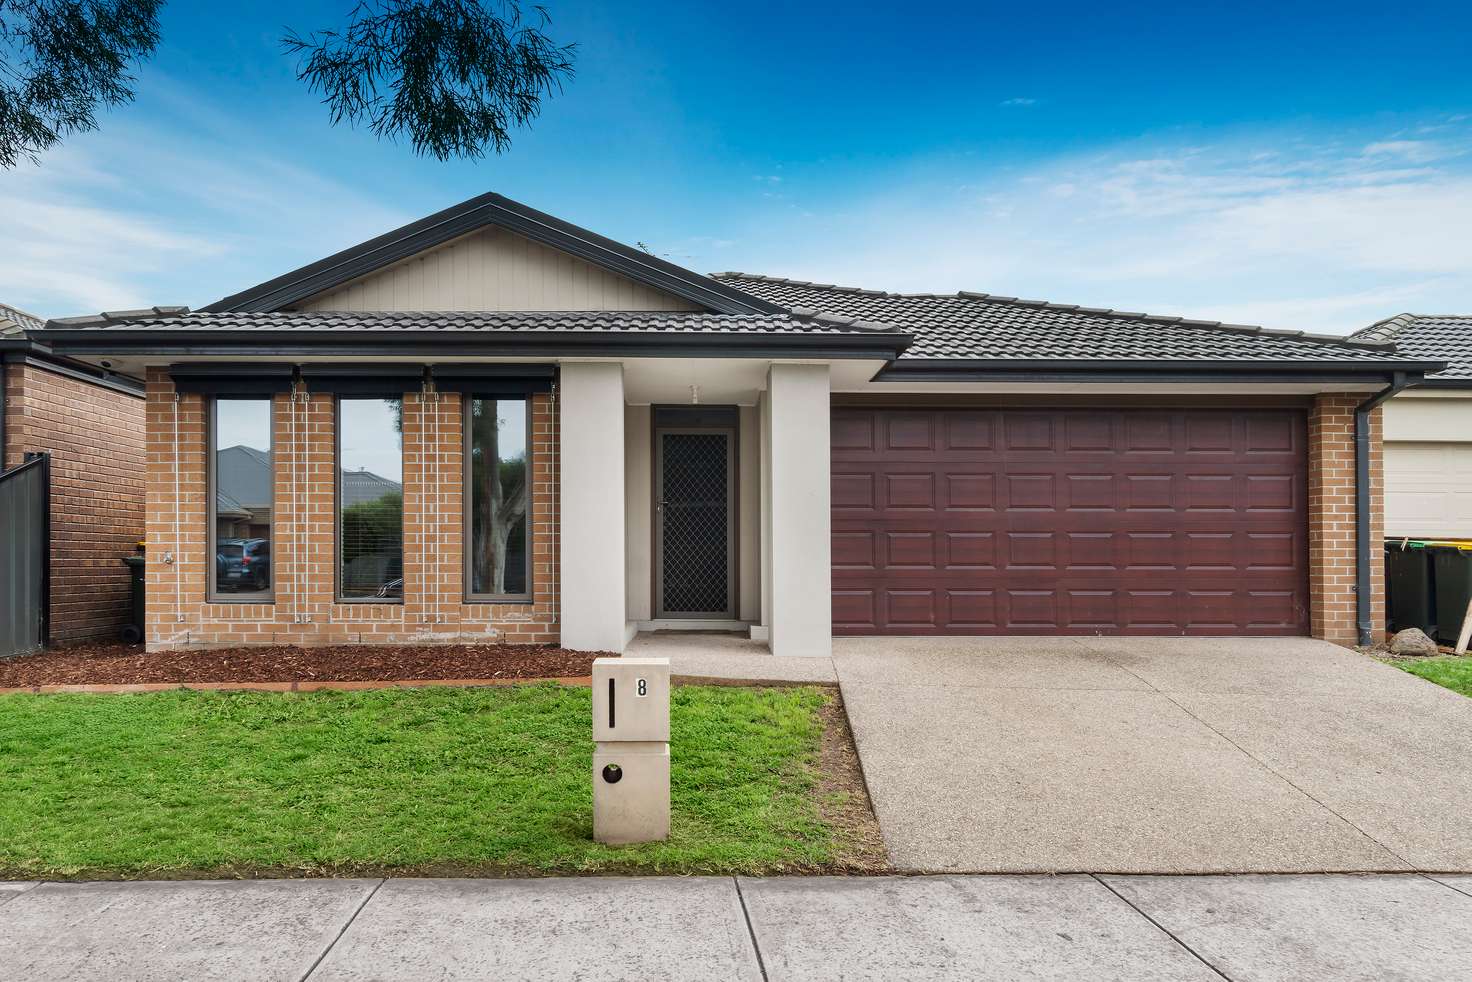 Main view of Homely house listing, 8 Lupin Street, Mernda VIC 3754